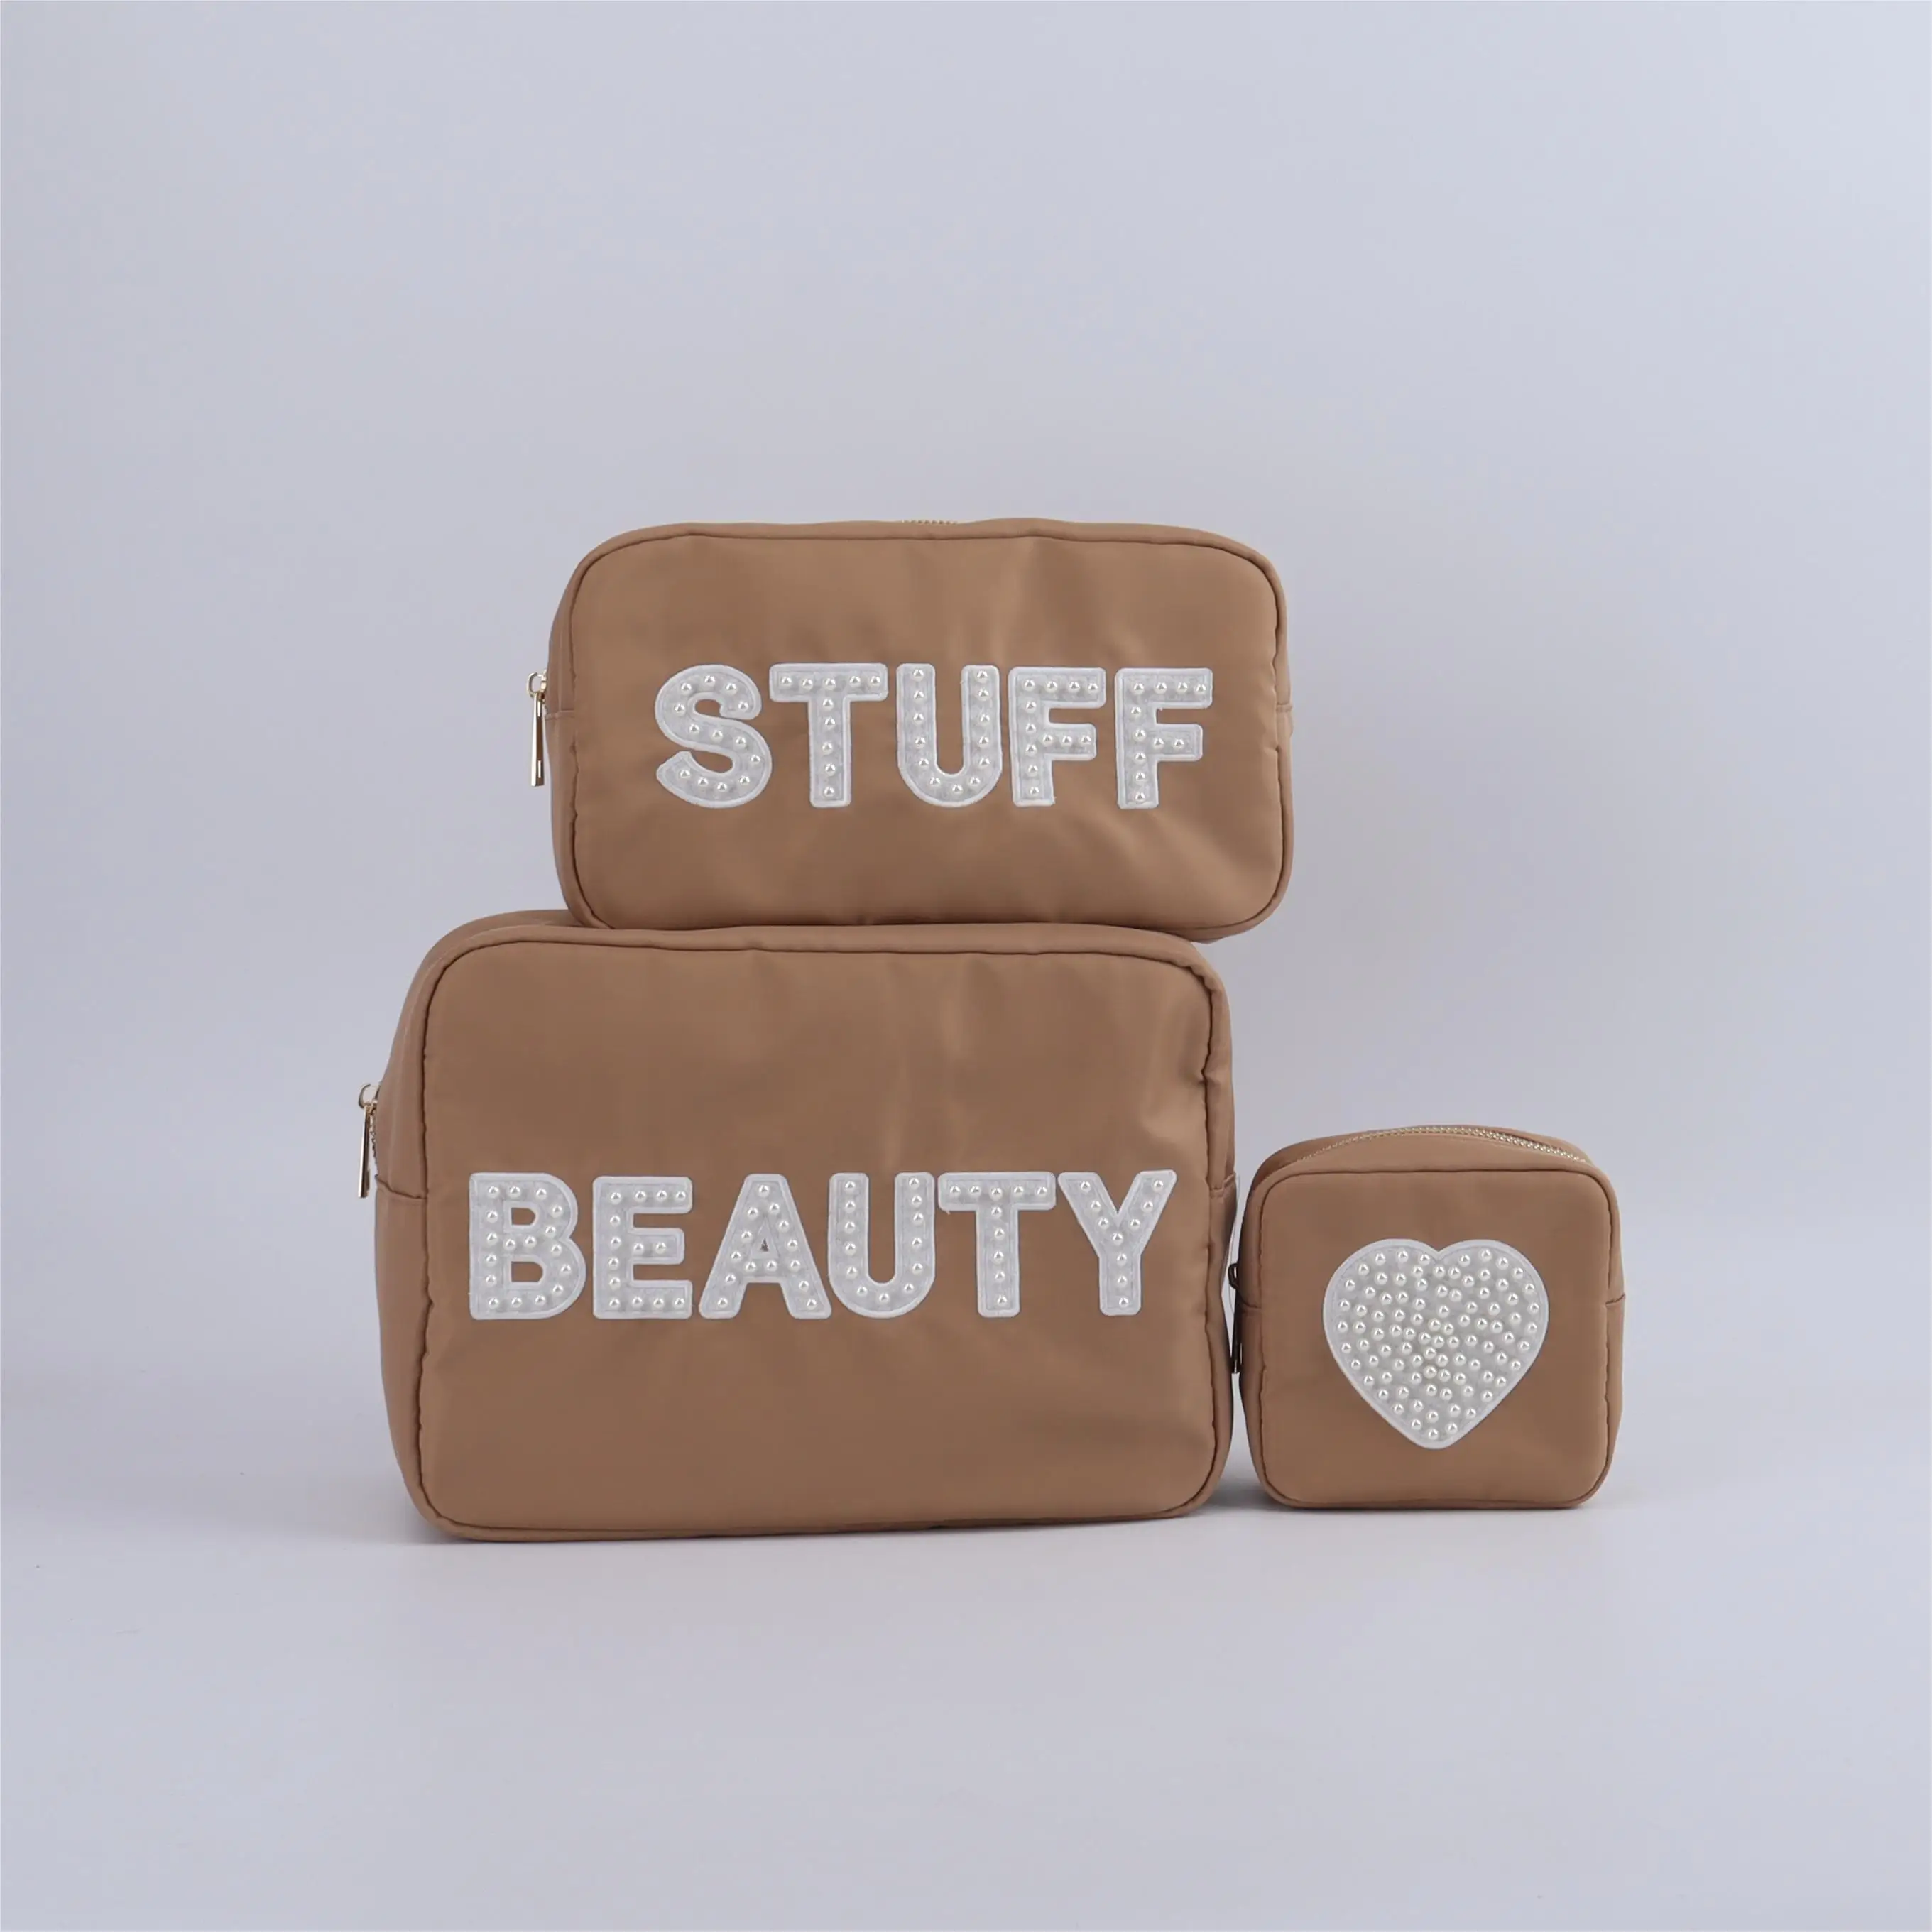 

Personalized Travel Storage Pouch Bride Gift Embroidered Pearl Letters Toiletry Bag Brown Nylon Cosmetic Bags Makeup Bag